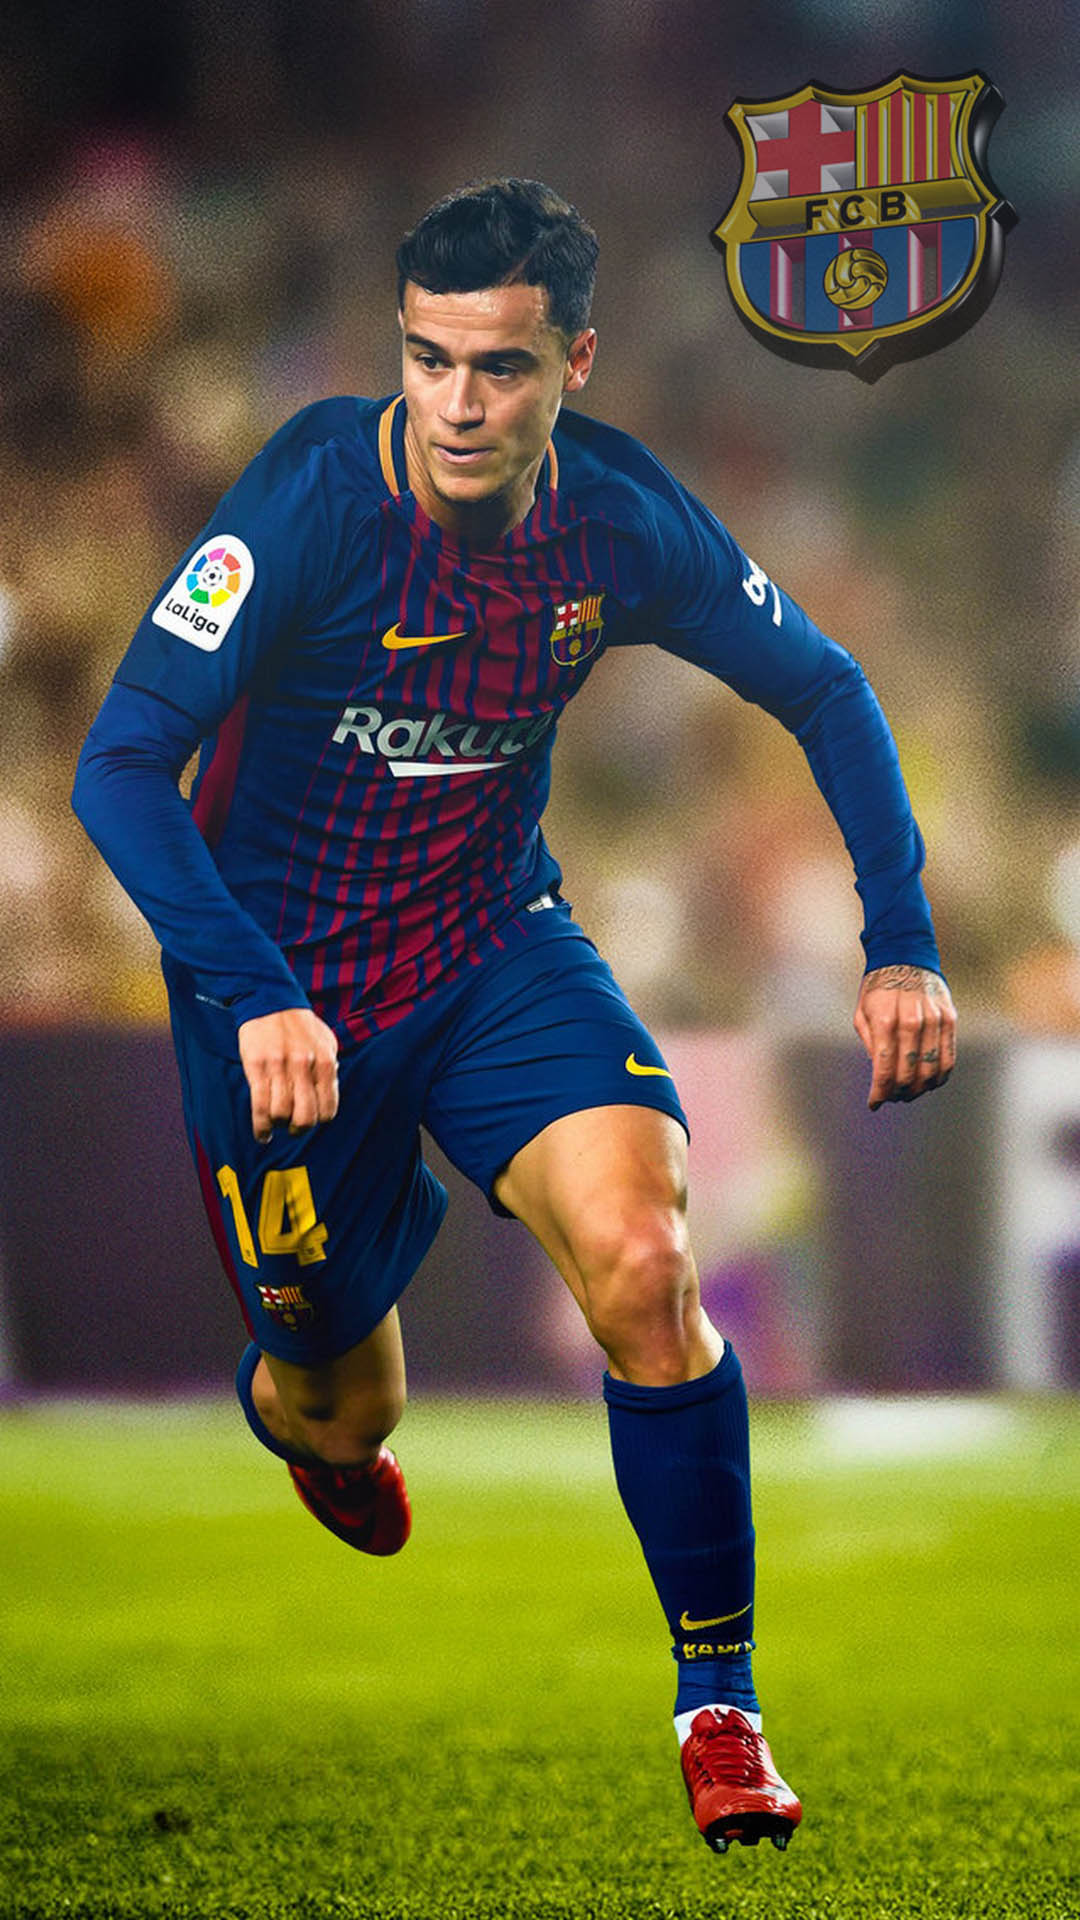 Coutinho Barcelona Wallpaper Android with HD resolution 1080x1920